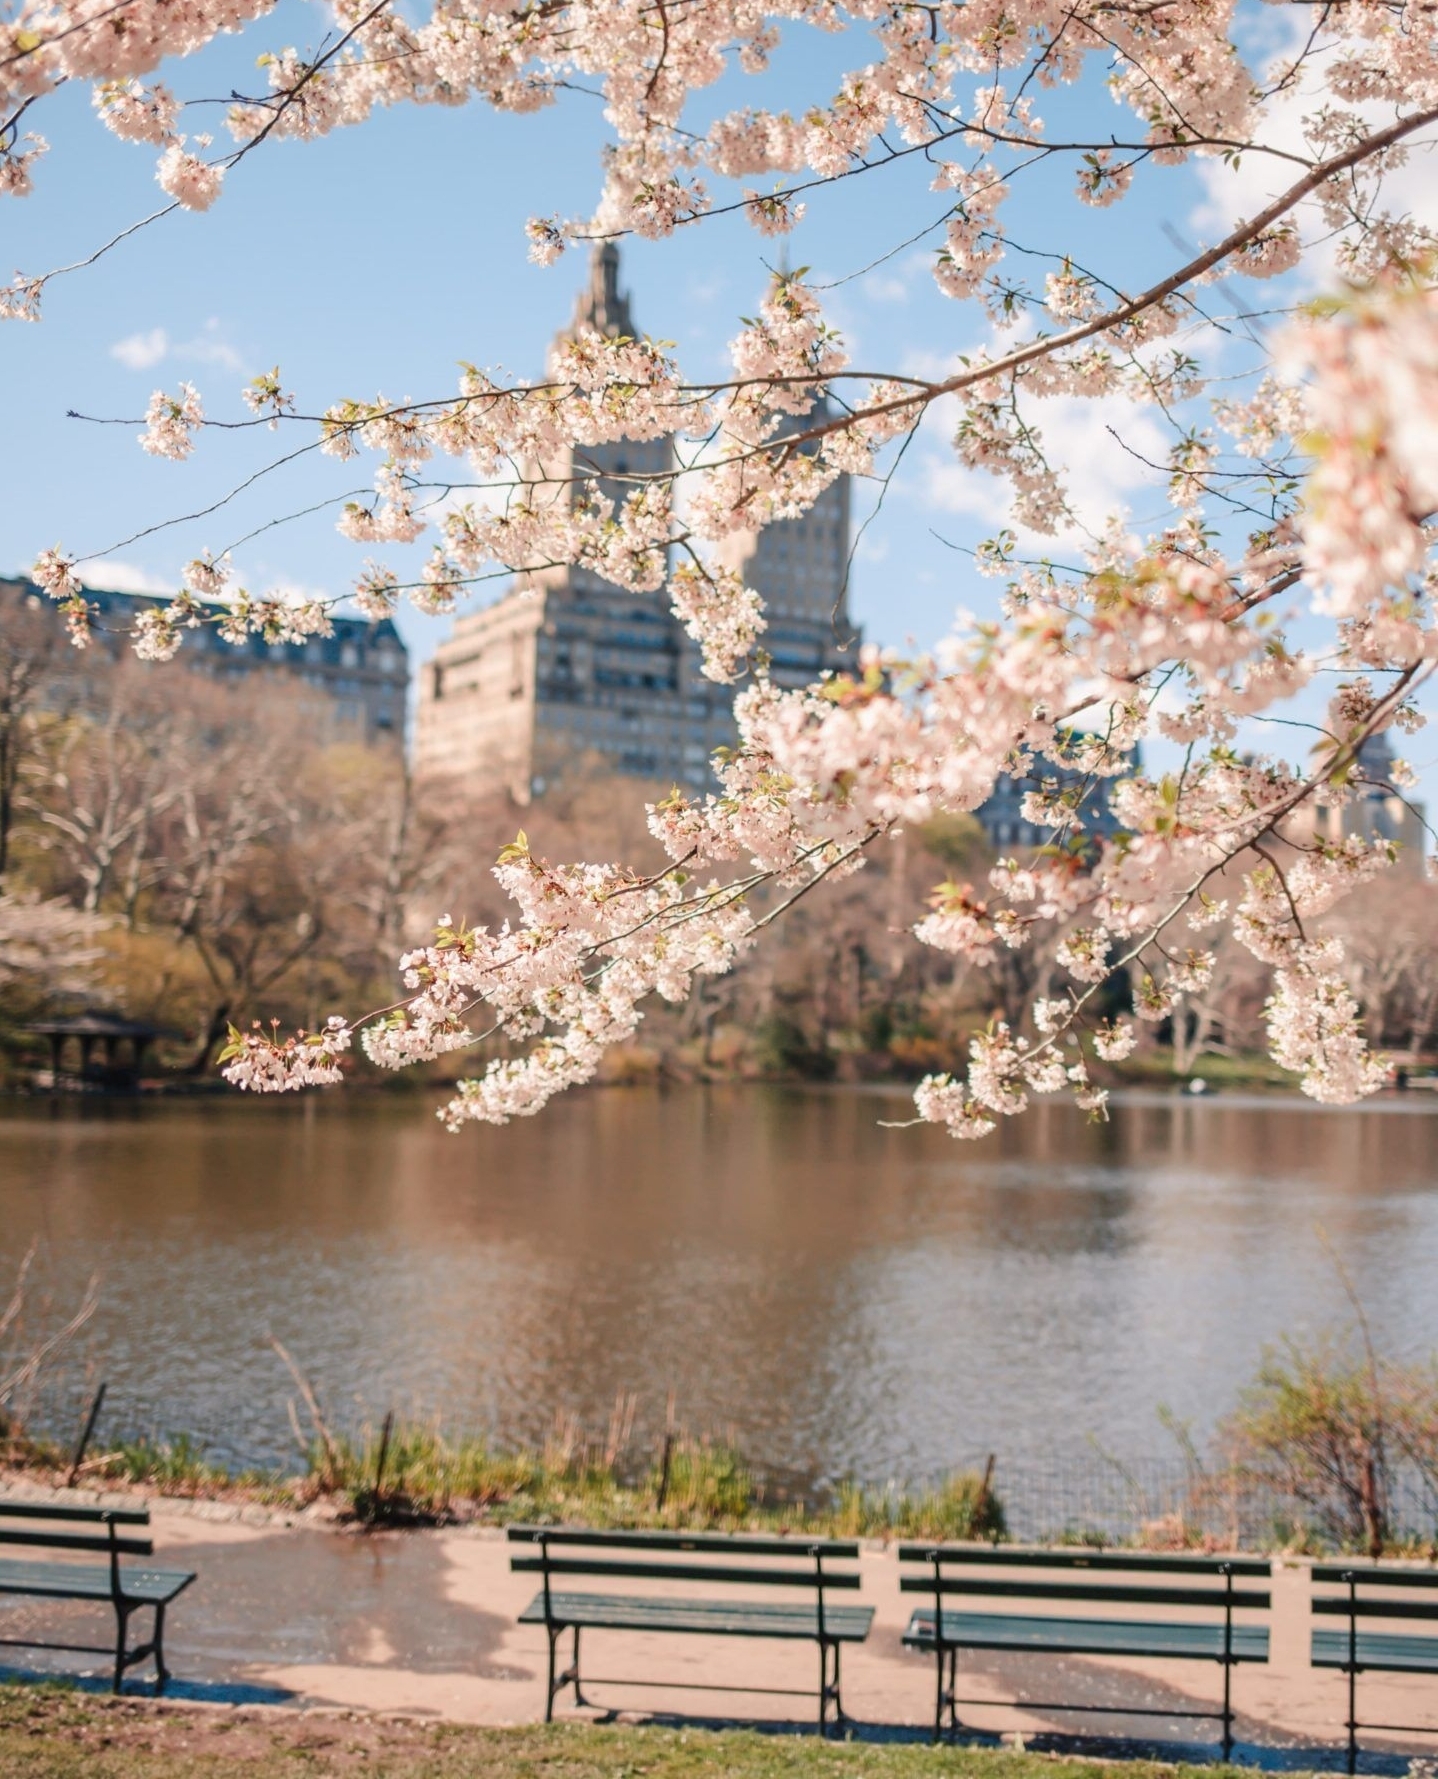 stay close, but still feel worlds away. a blooming Central Park awaits⁠⁠photo by @danaberez